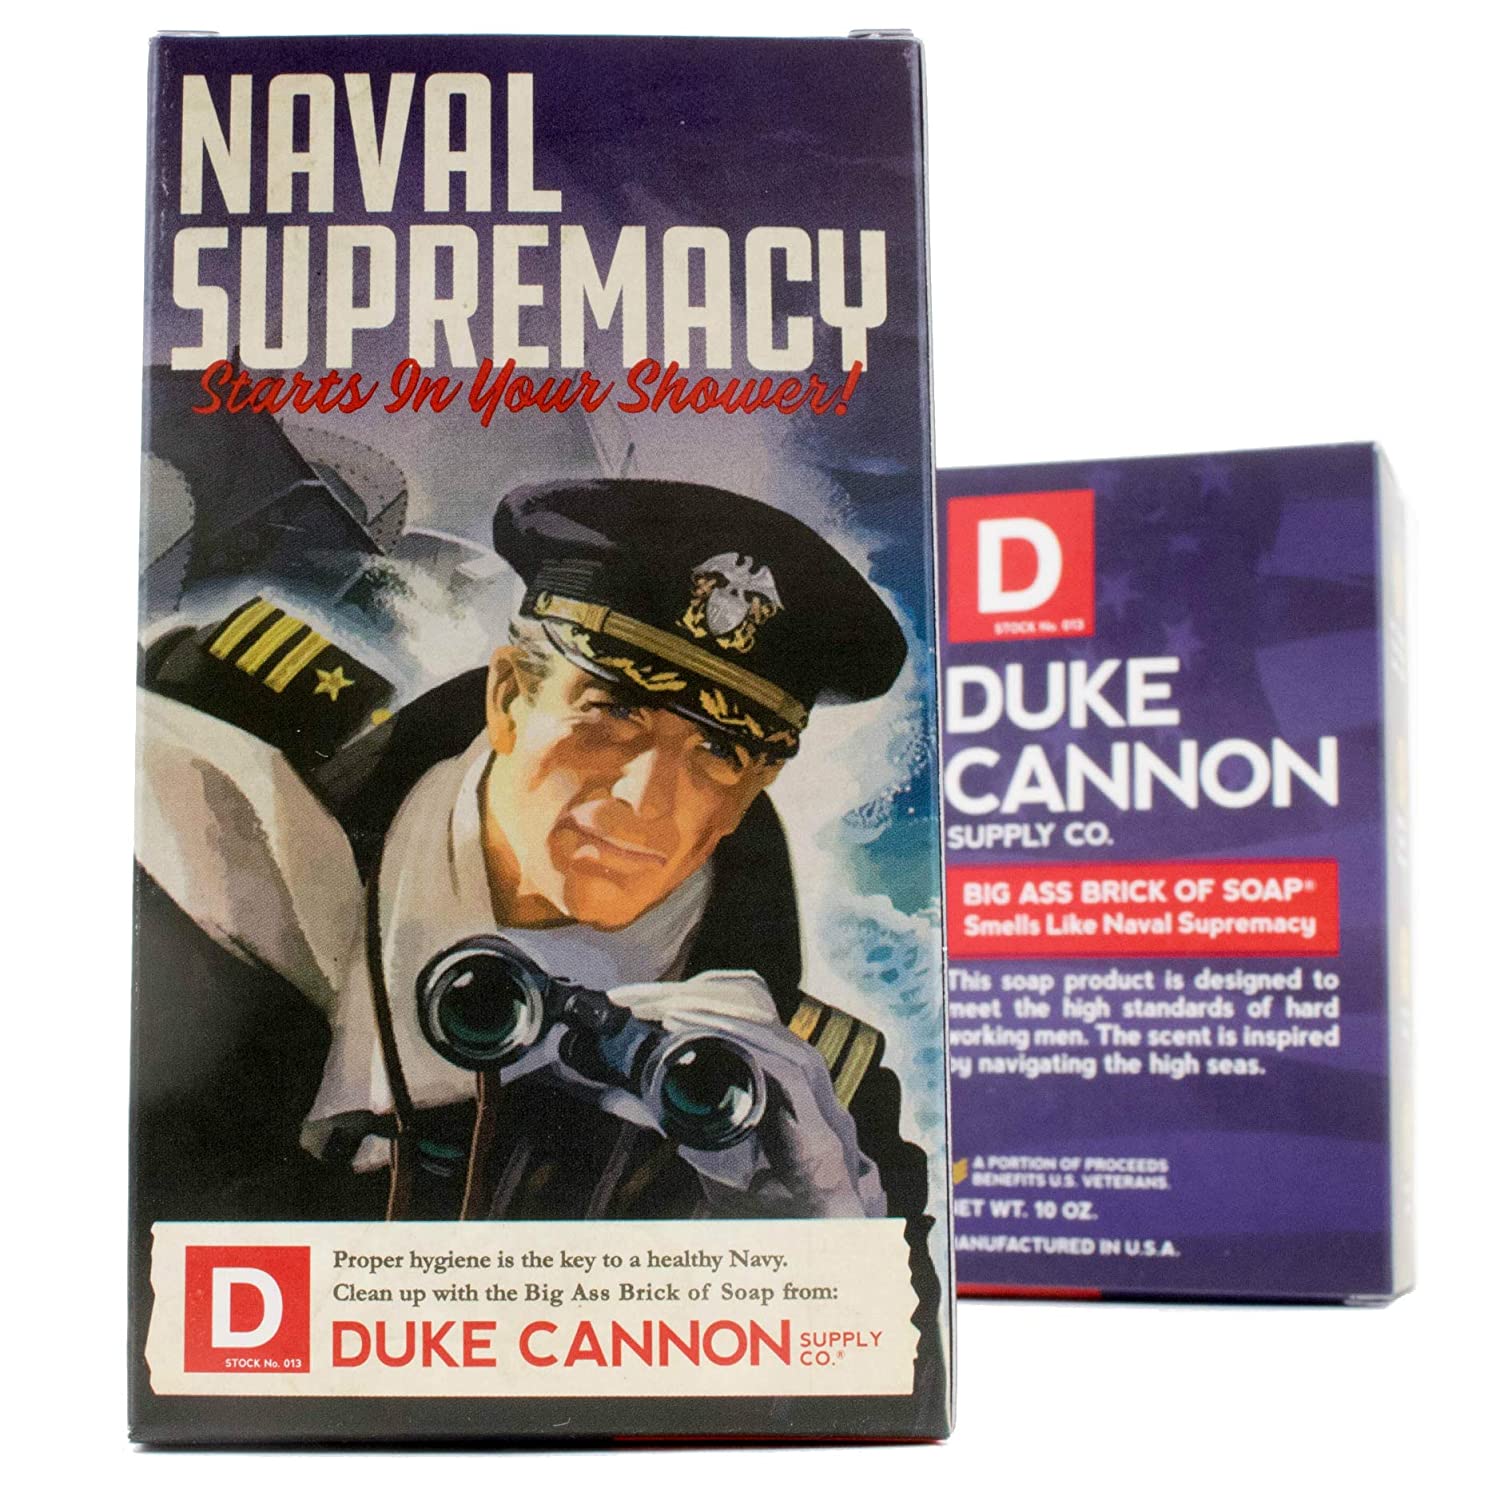 [In stock｜Free shipping] Duke Cannon - Oversized Brick Soap Navy Supreme Fragrance丨2 World Wars Limited Edition丨LIMITED EDITION WWII-ERA BIG ASS BRICK OF SOAP NAVAL SUPREMACY